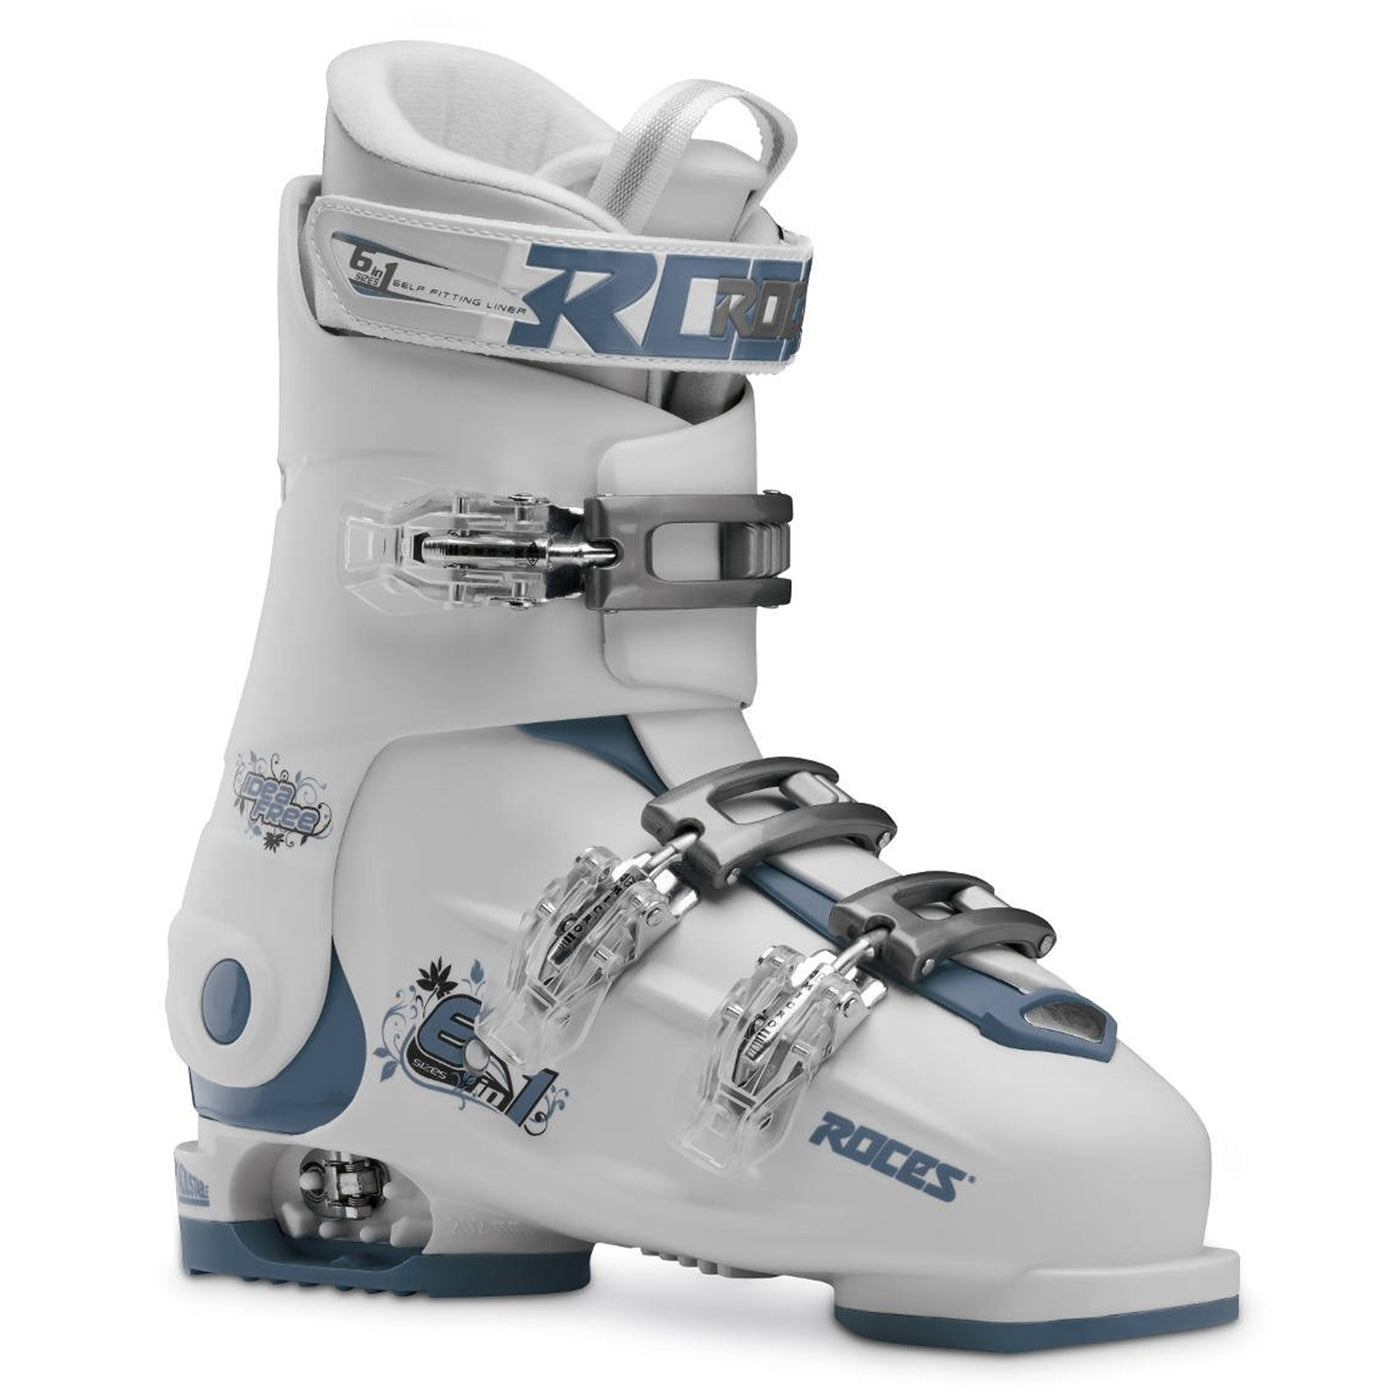 Roces IDEA Free Adjustable Youth Ski Boots | Size 22.5 - 25.5 MP - (Open Box Return) SKI BOOTS Roces White/Teal  